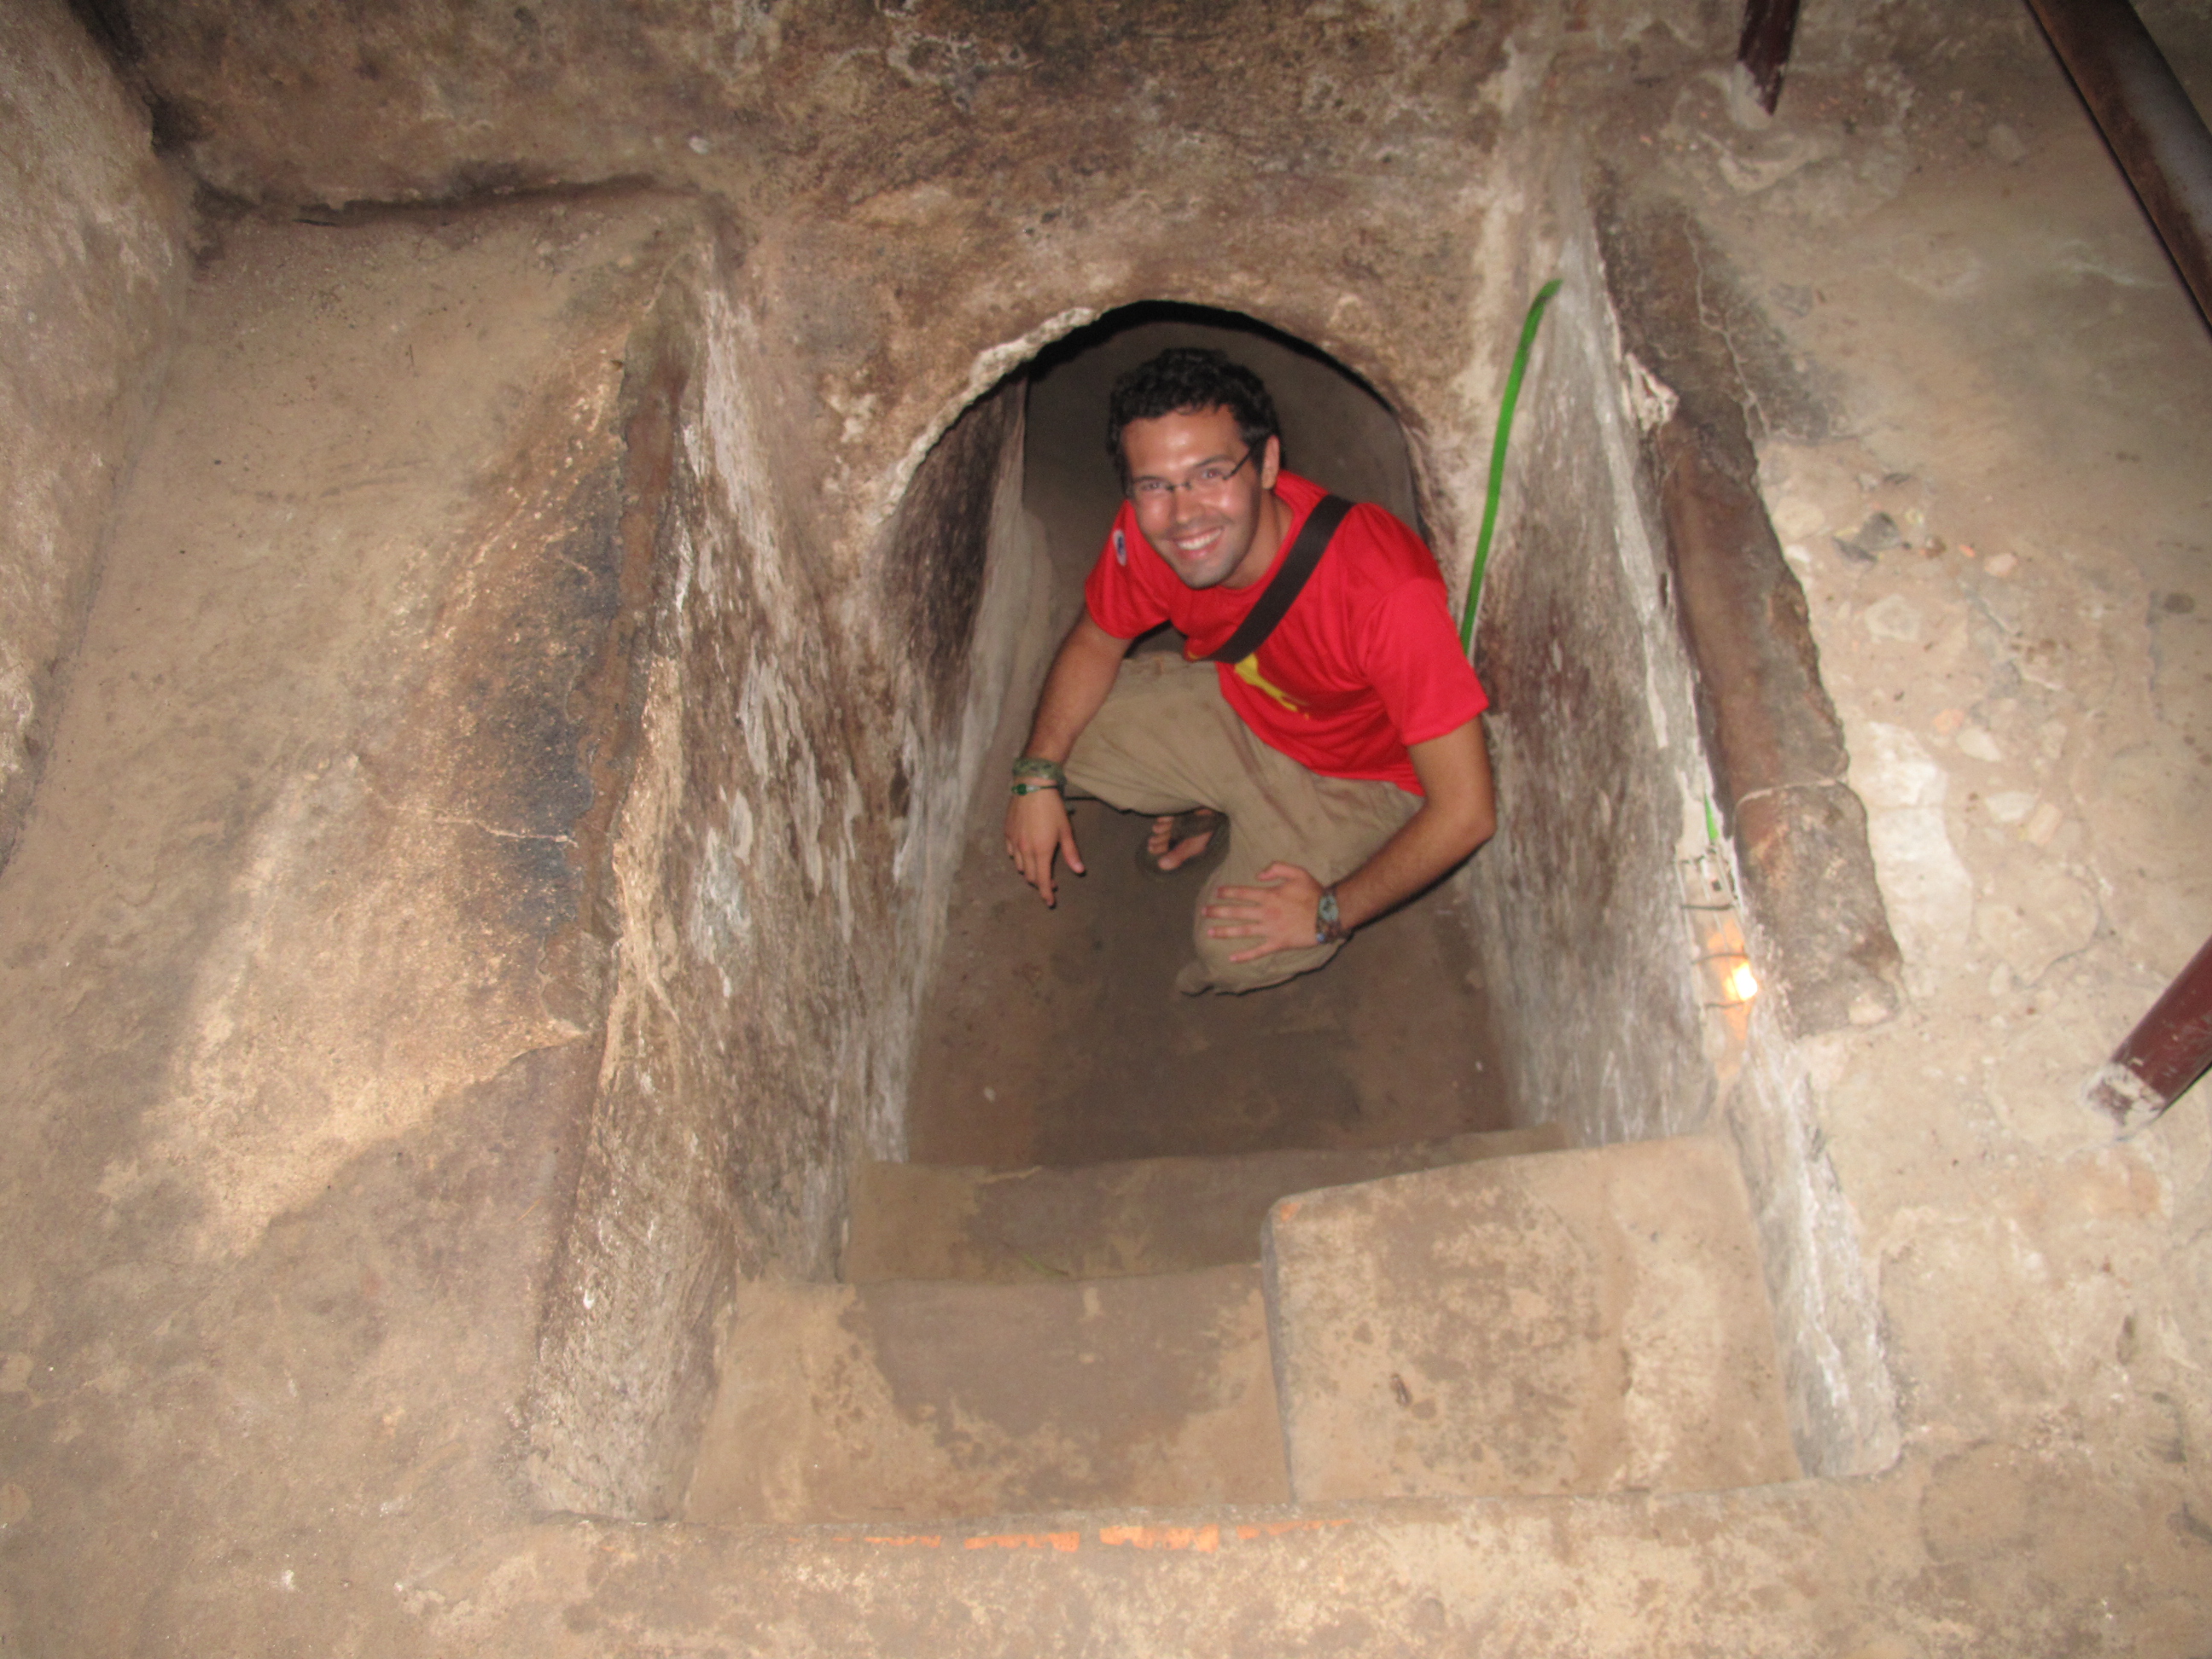 This is a picture of me in one of the Cuchi tunnels in Vietnam.